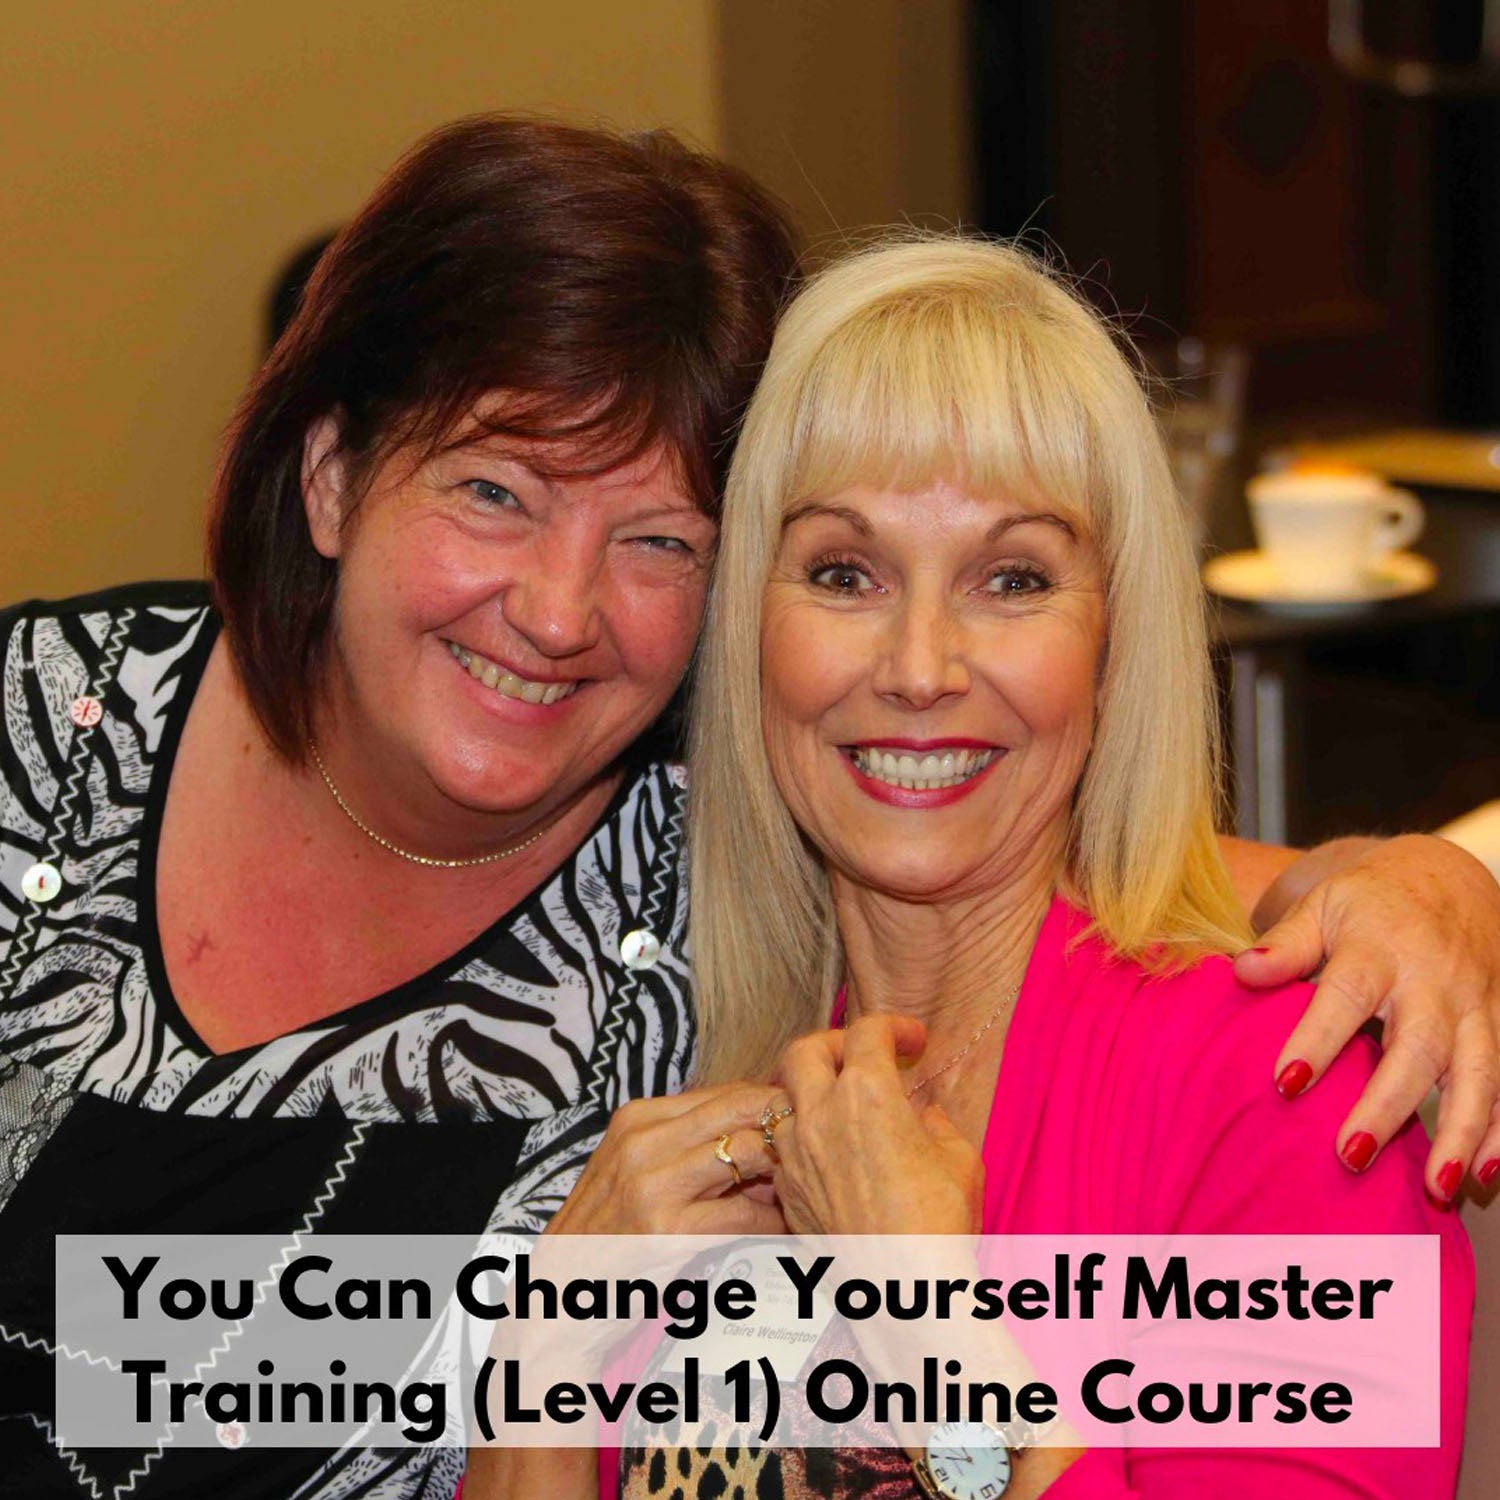 &quot;You Can Change Yourself Master Training&quot; (Level 1) ONLINE Course, skillstochange.com